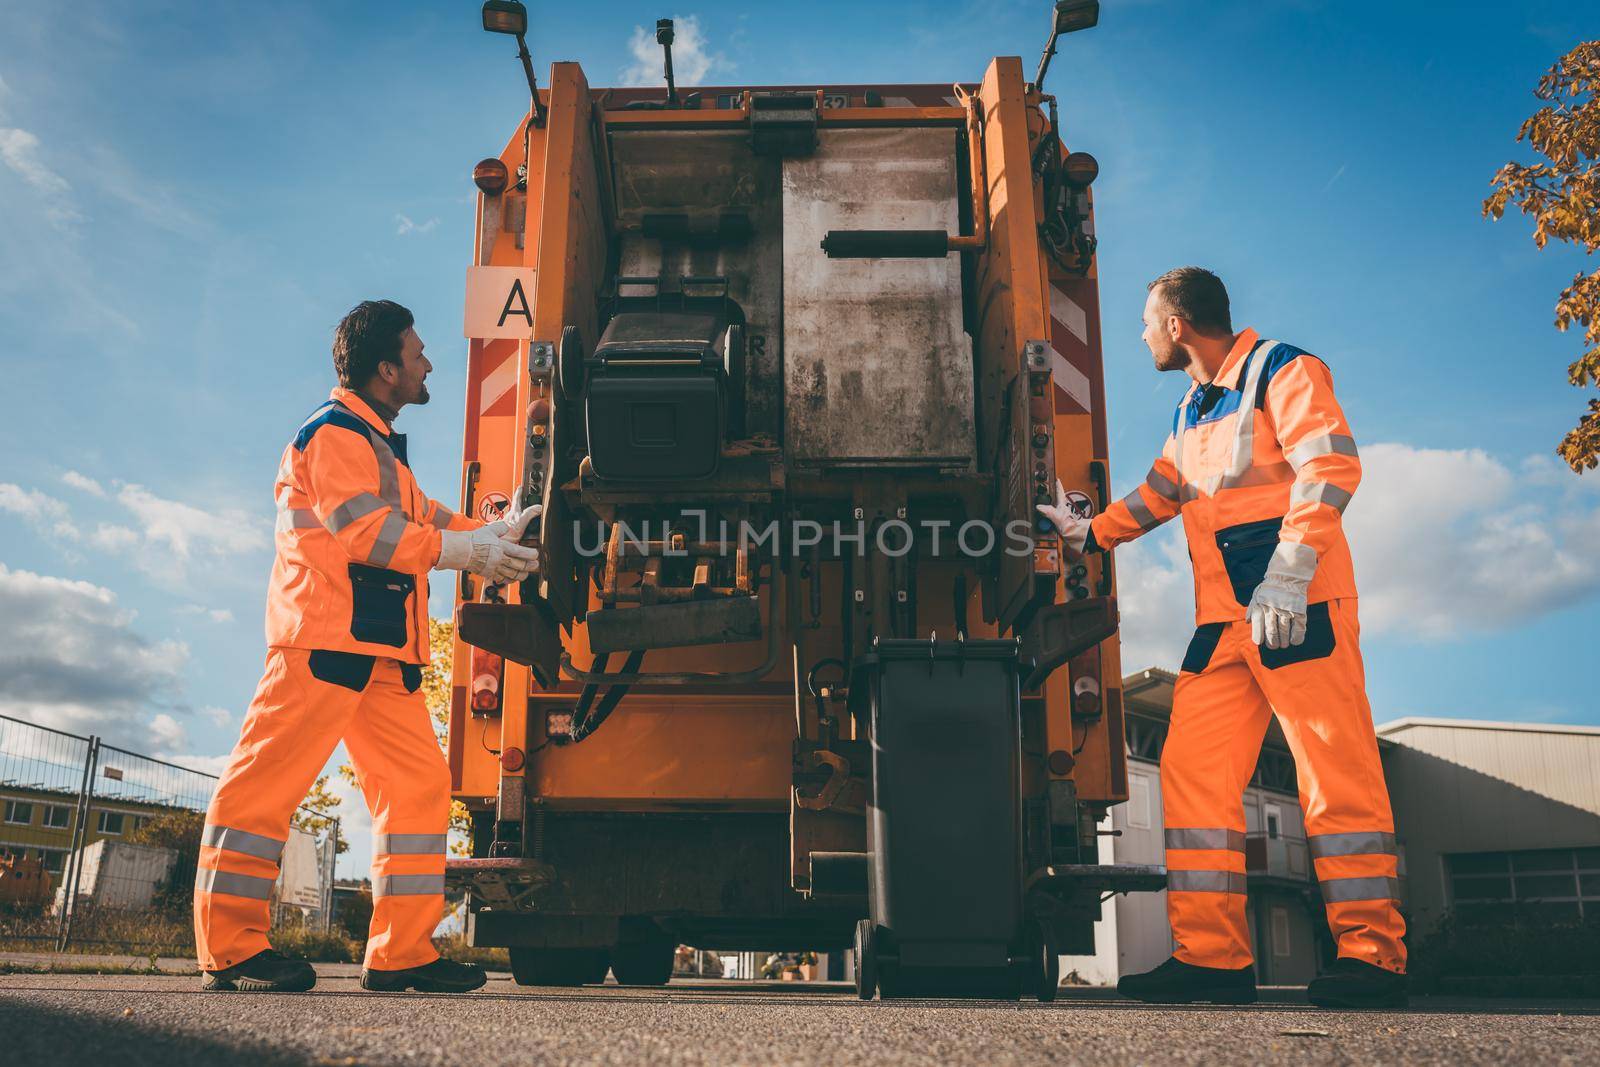 Two refuse collection workers loading garbage into waste truck by Kzenon